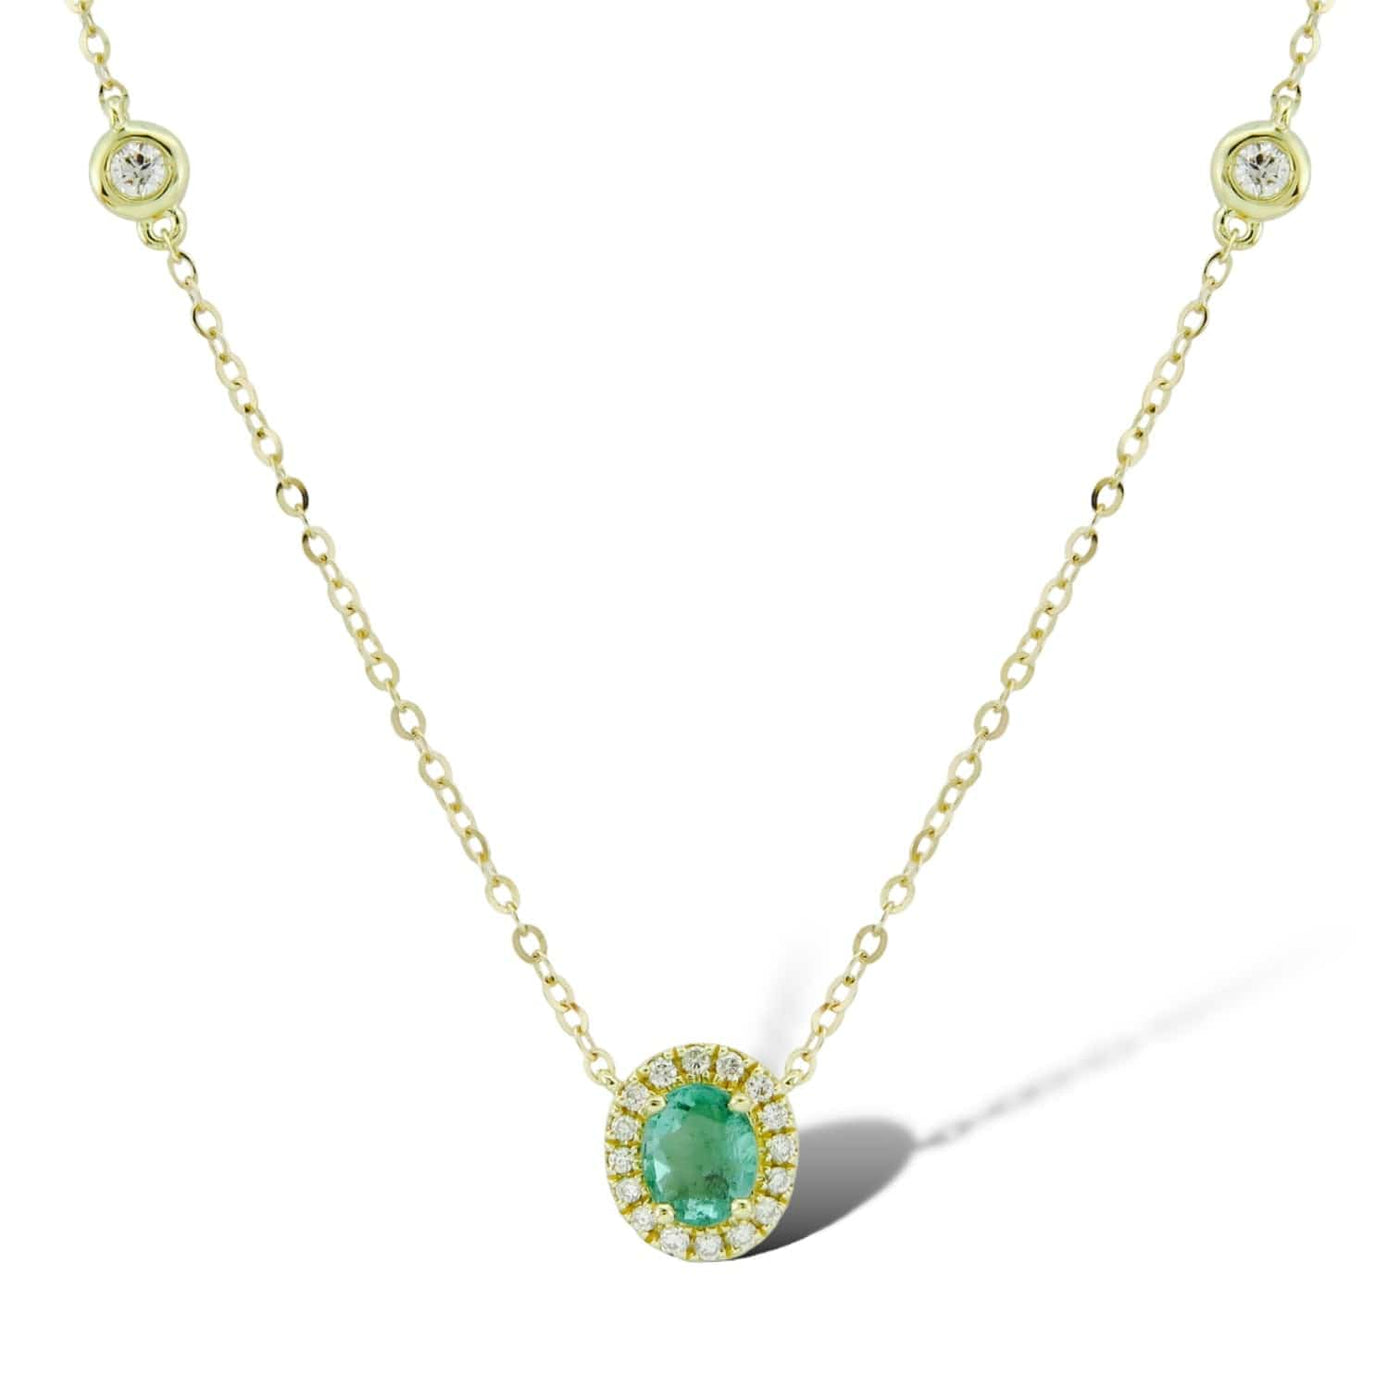 OVAL SHAPED PENDANT WITH EMERALD AND DIAMONDS